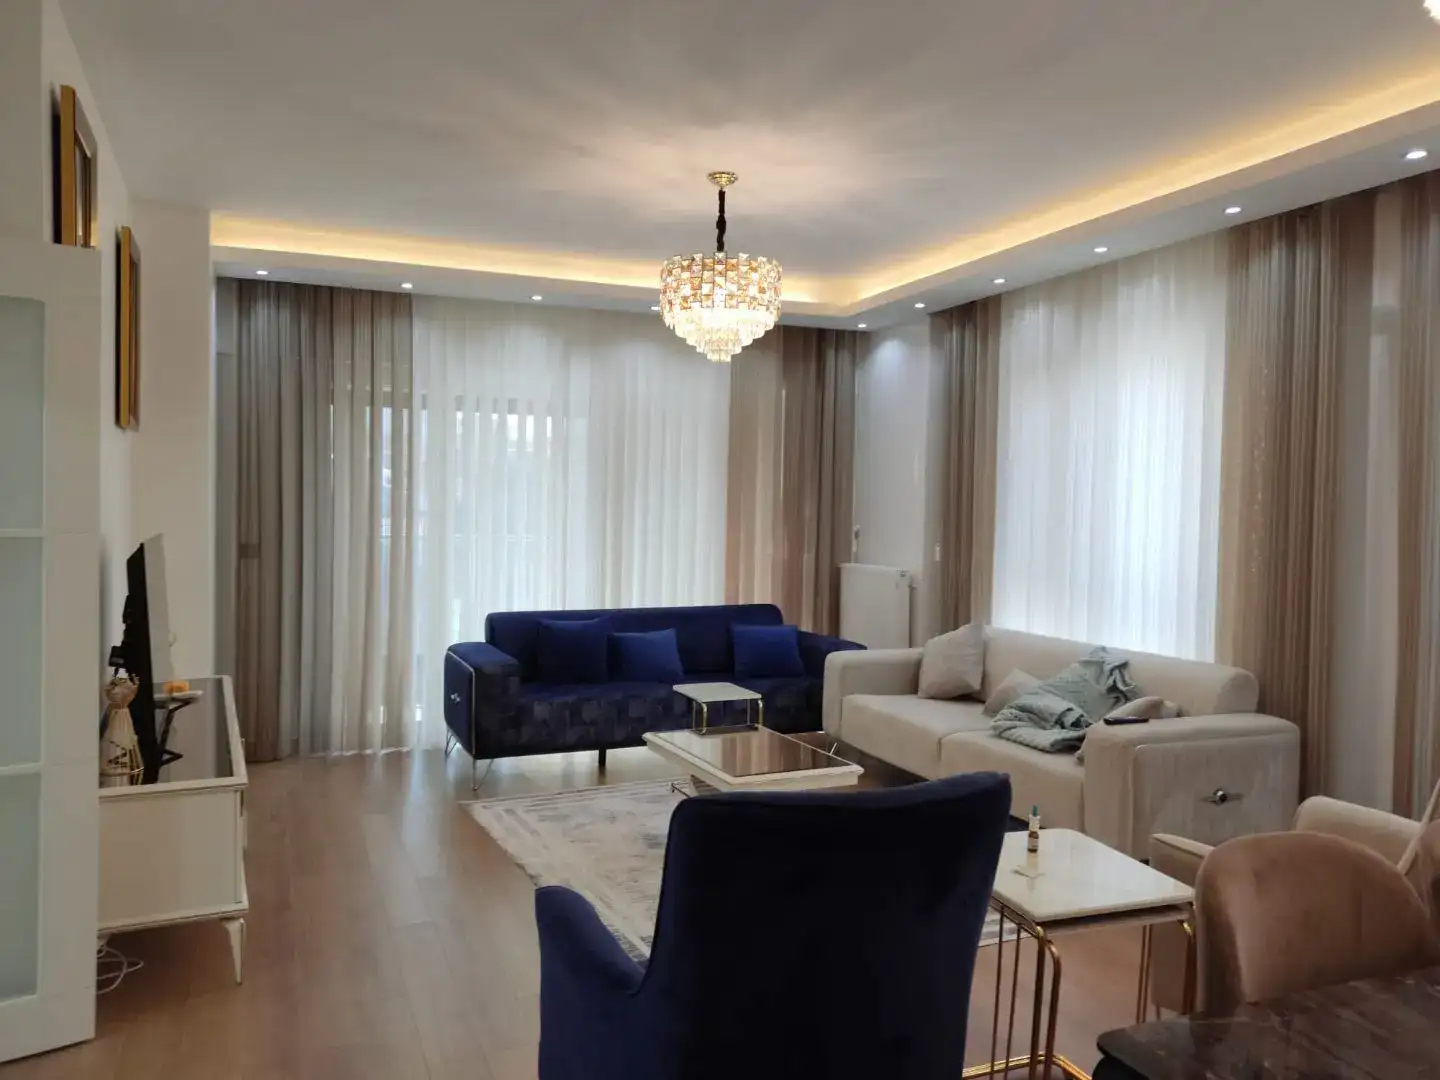 FURNISHED APARTMENT 3+1 IN A NEW HOUSE IN ISTANBUL - DON'T MISS IT